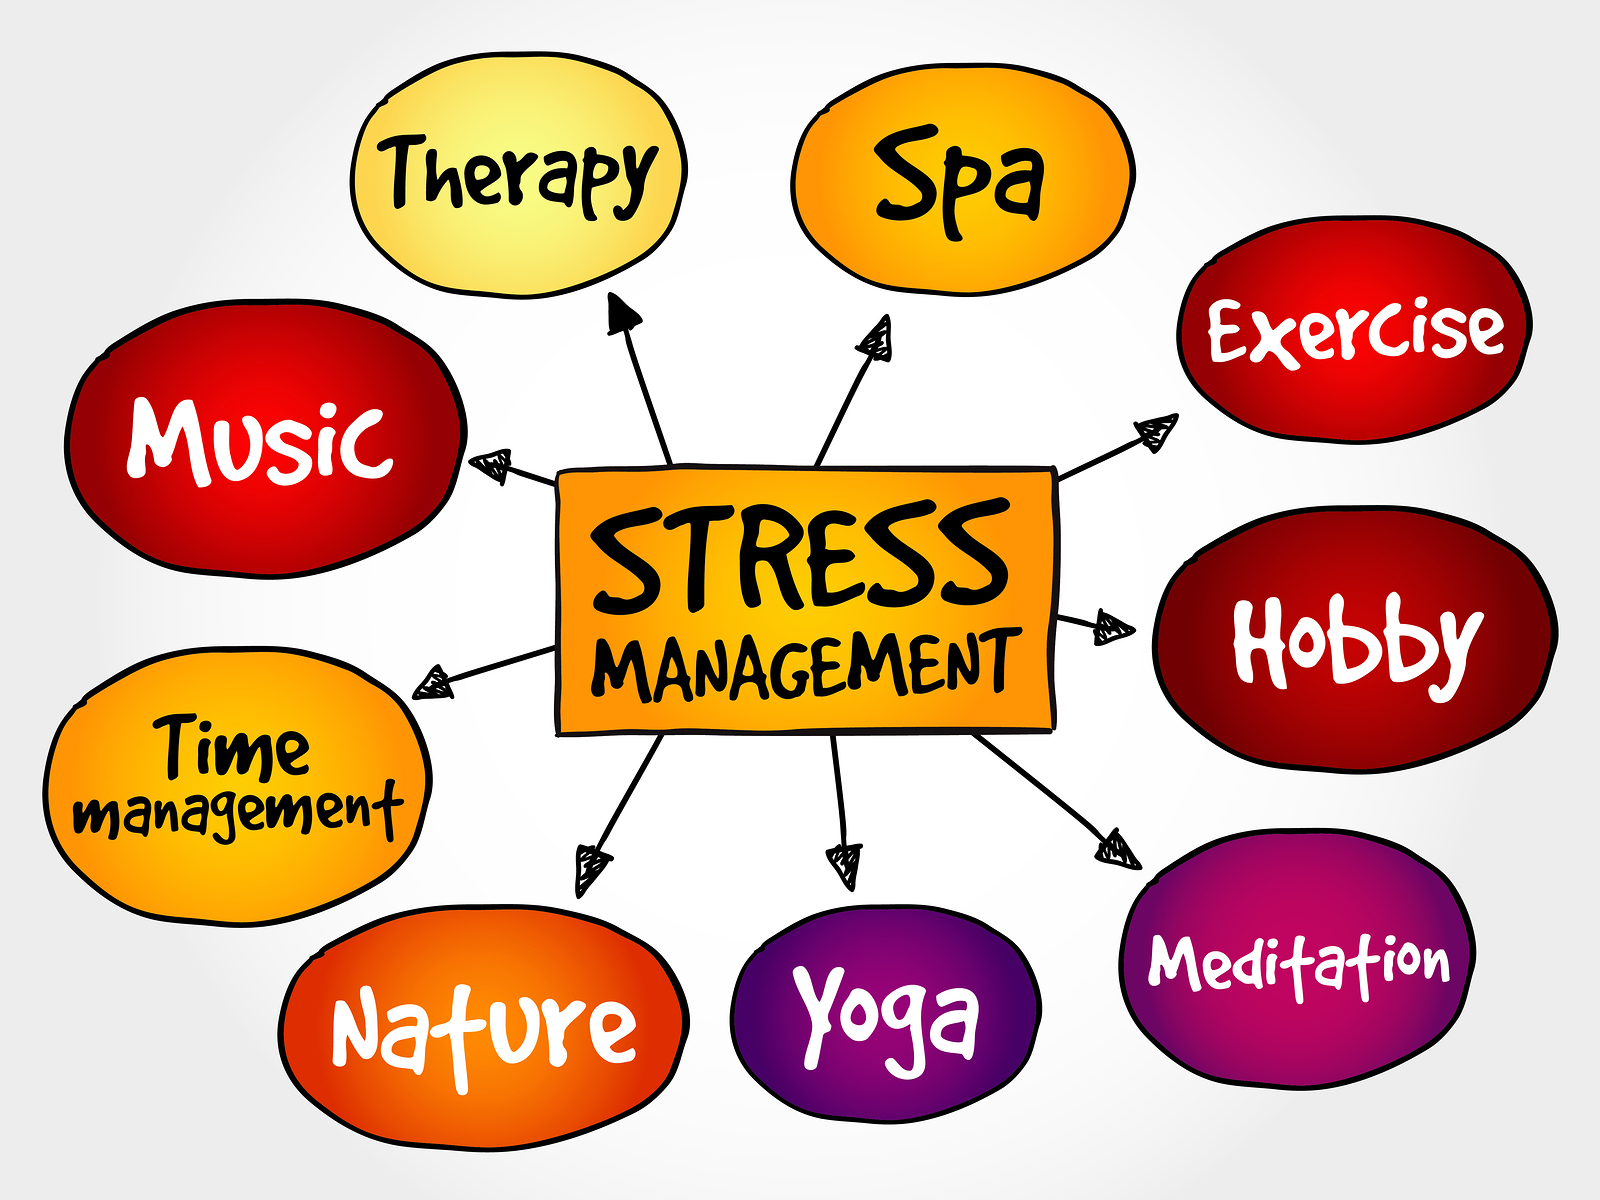 What is Stress Management?